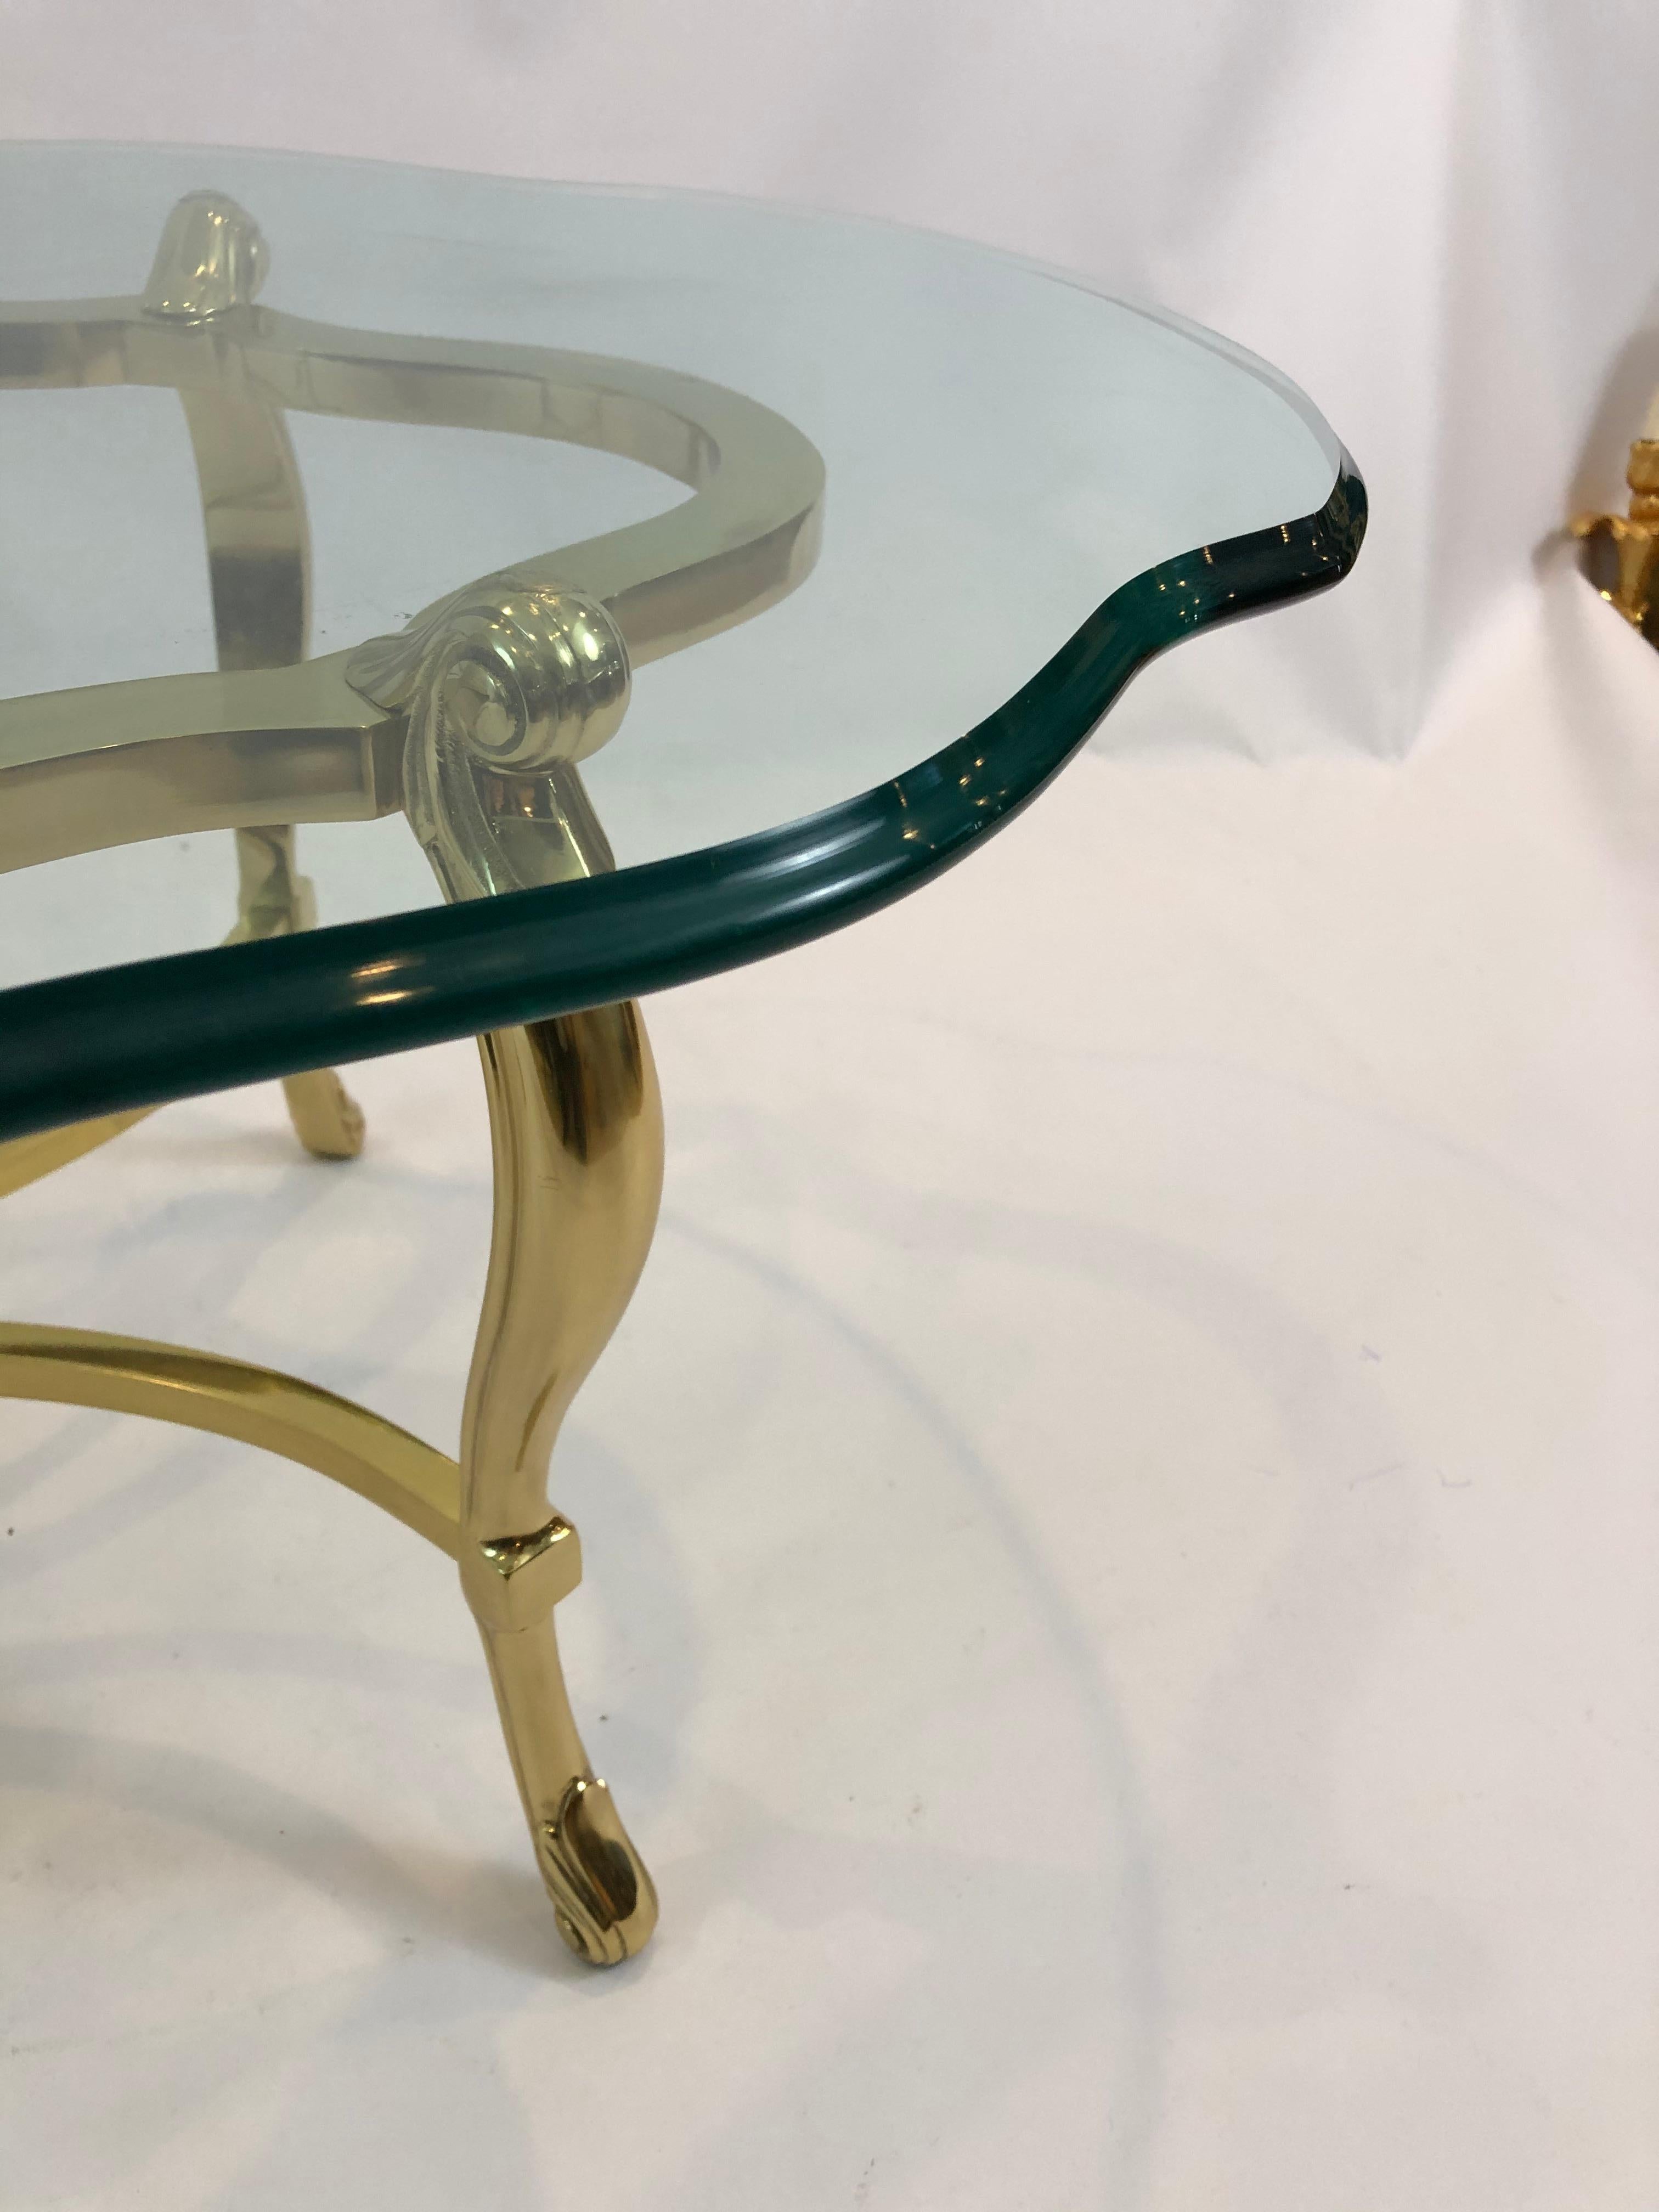 Super glamorous LaBarge coffee table having solid brass oval curvy base with cabriole legs and pretty stretcher, topped with a .75 thick scalloped bevelled edge piece of oval glass.